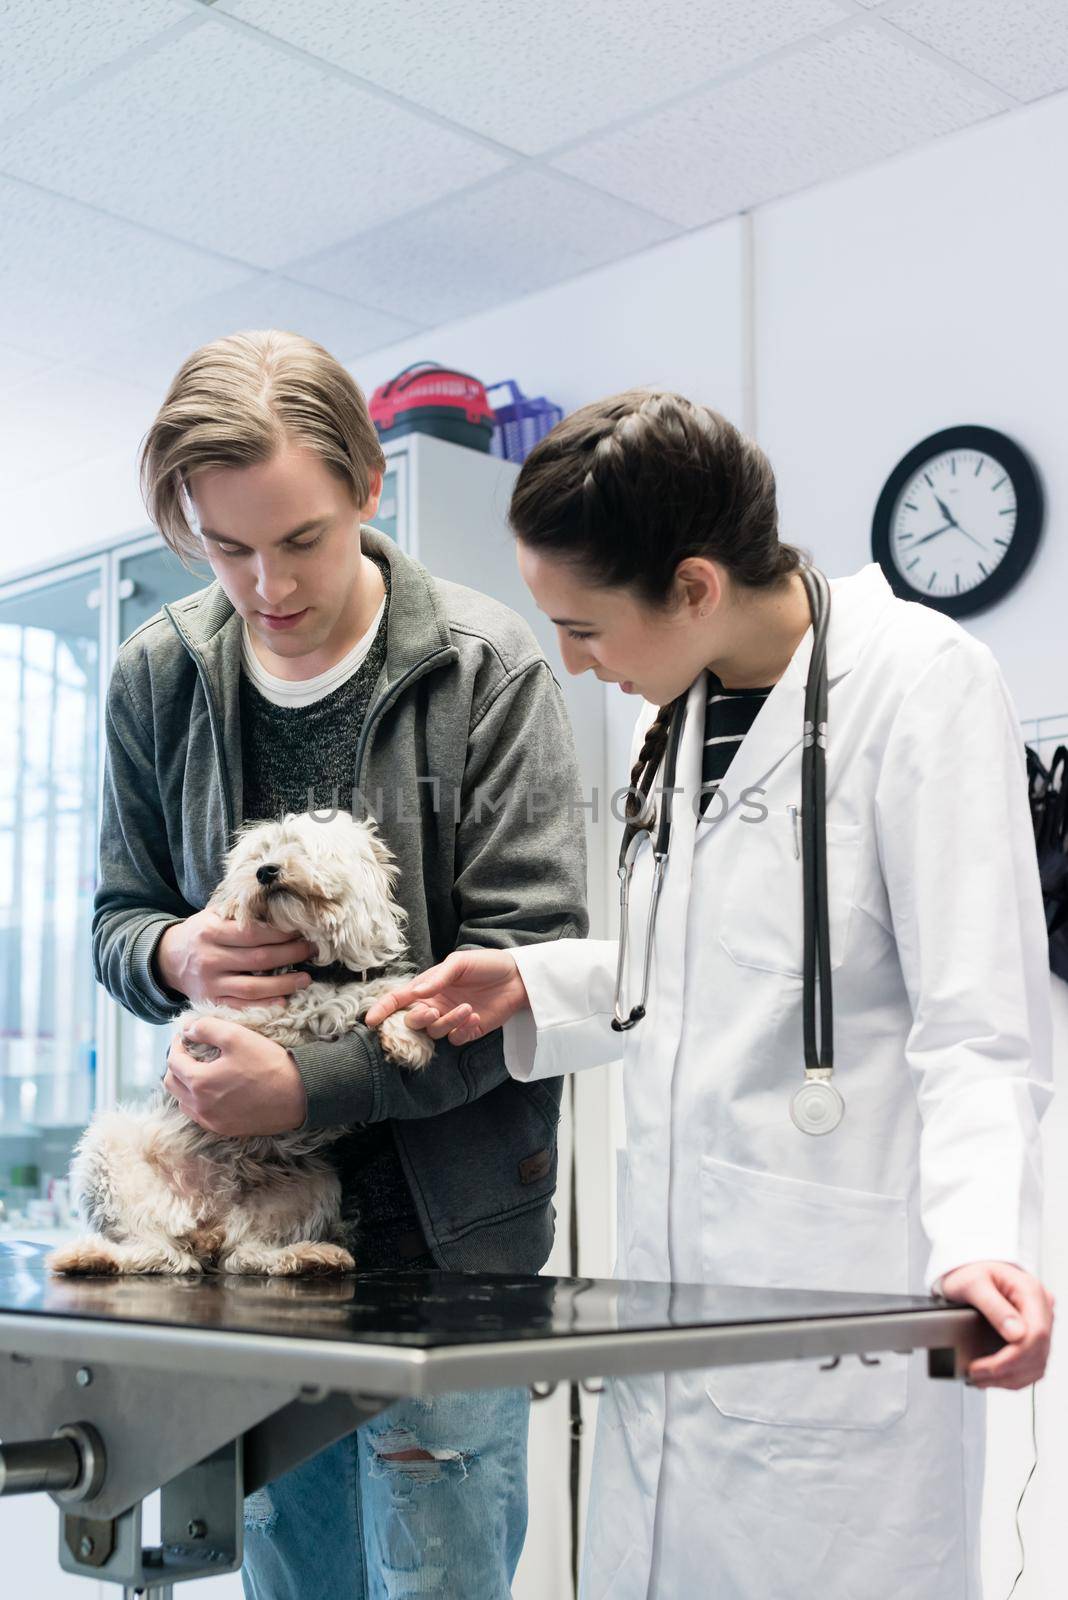 Male and female doctors examining small puppy in hospital